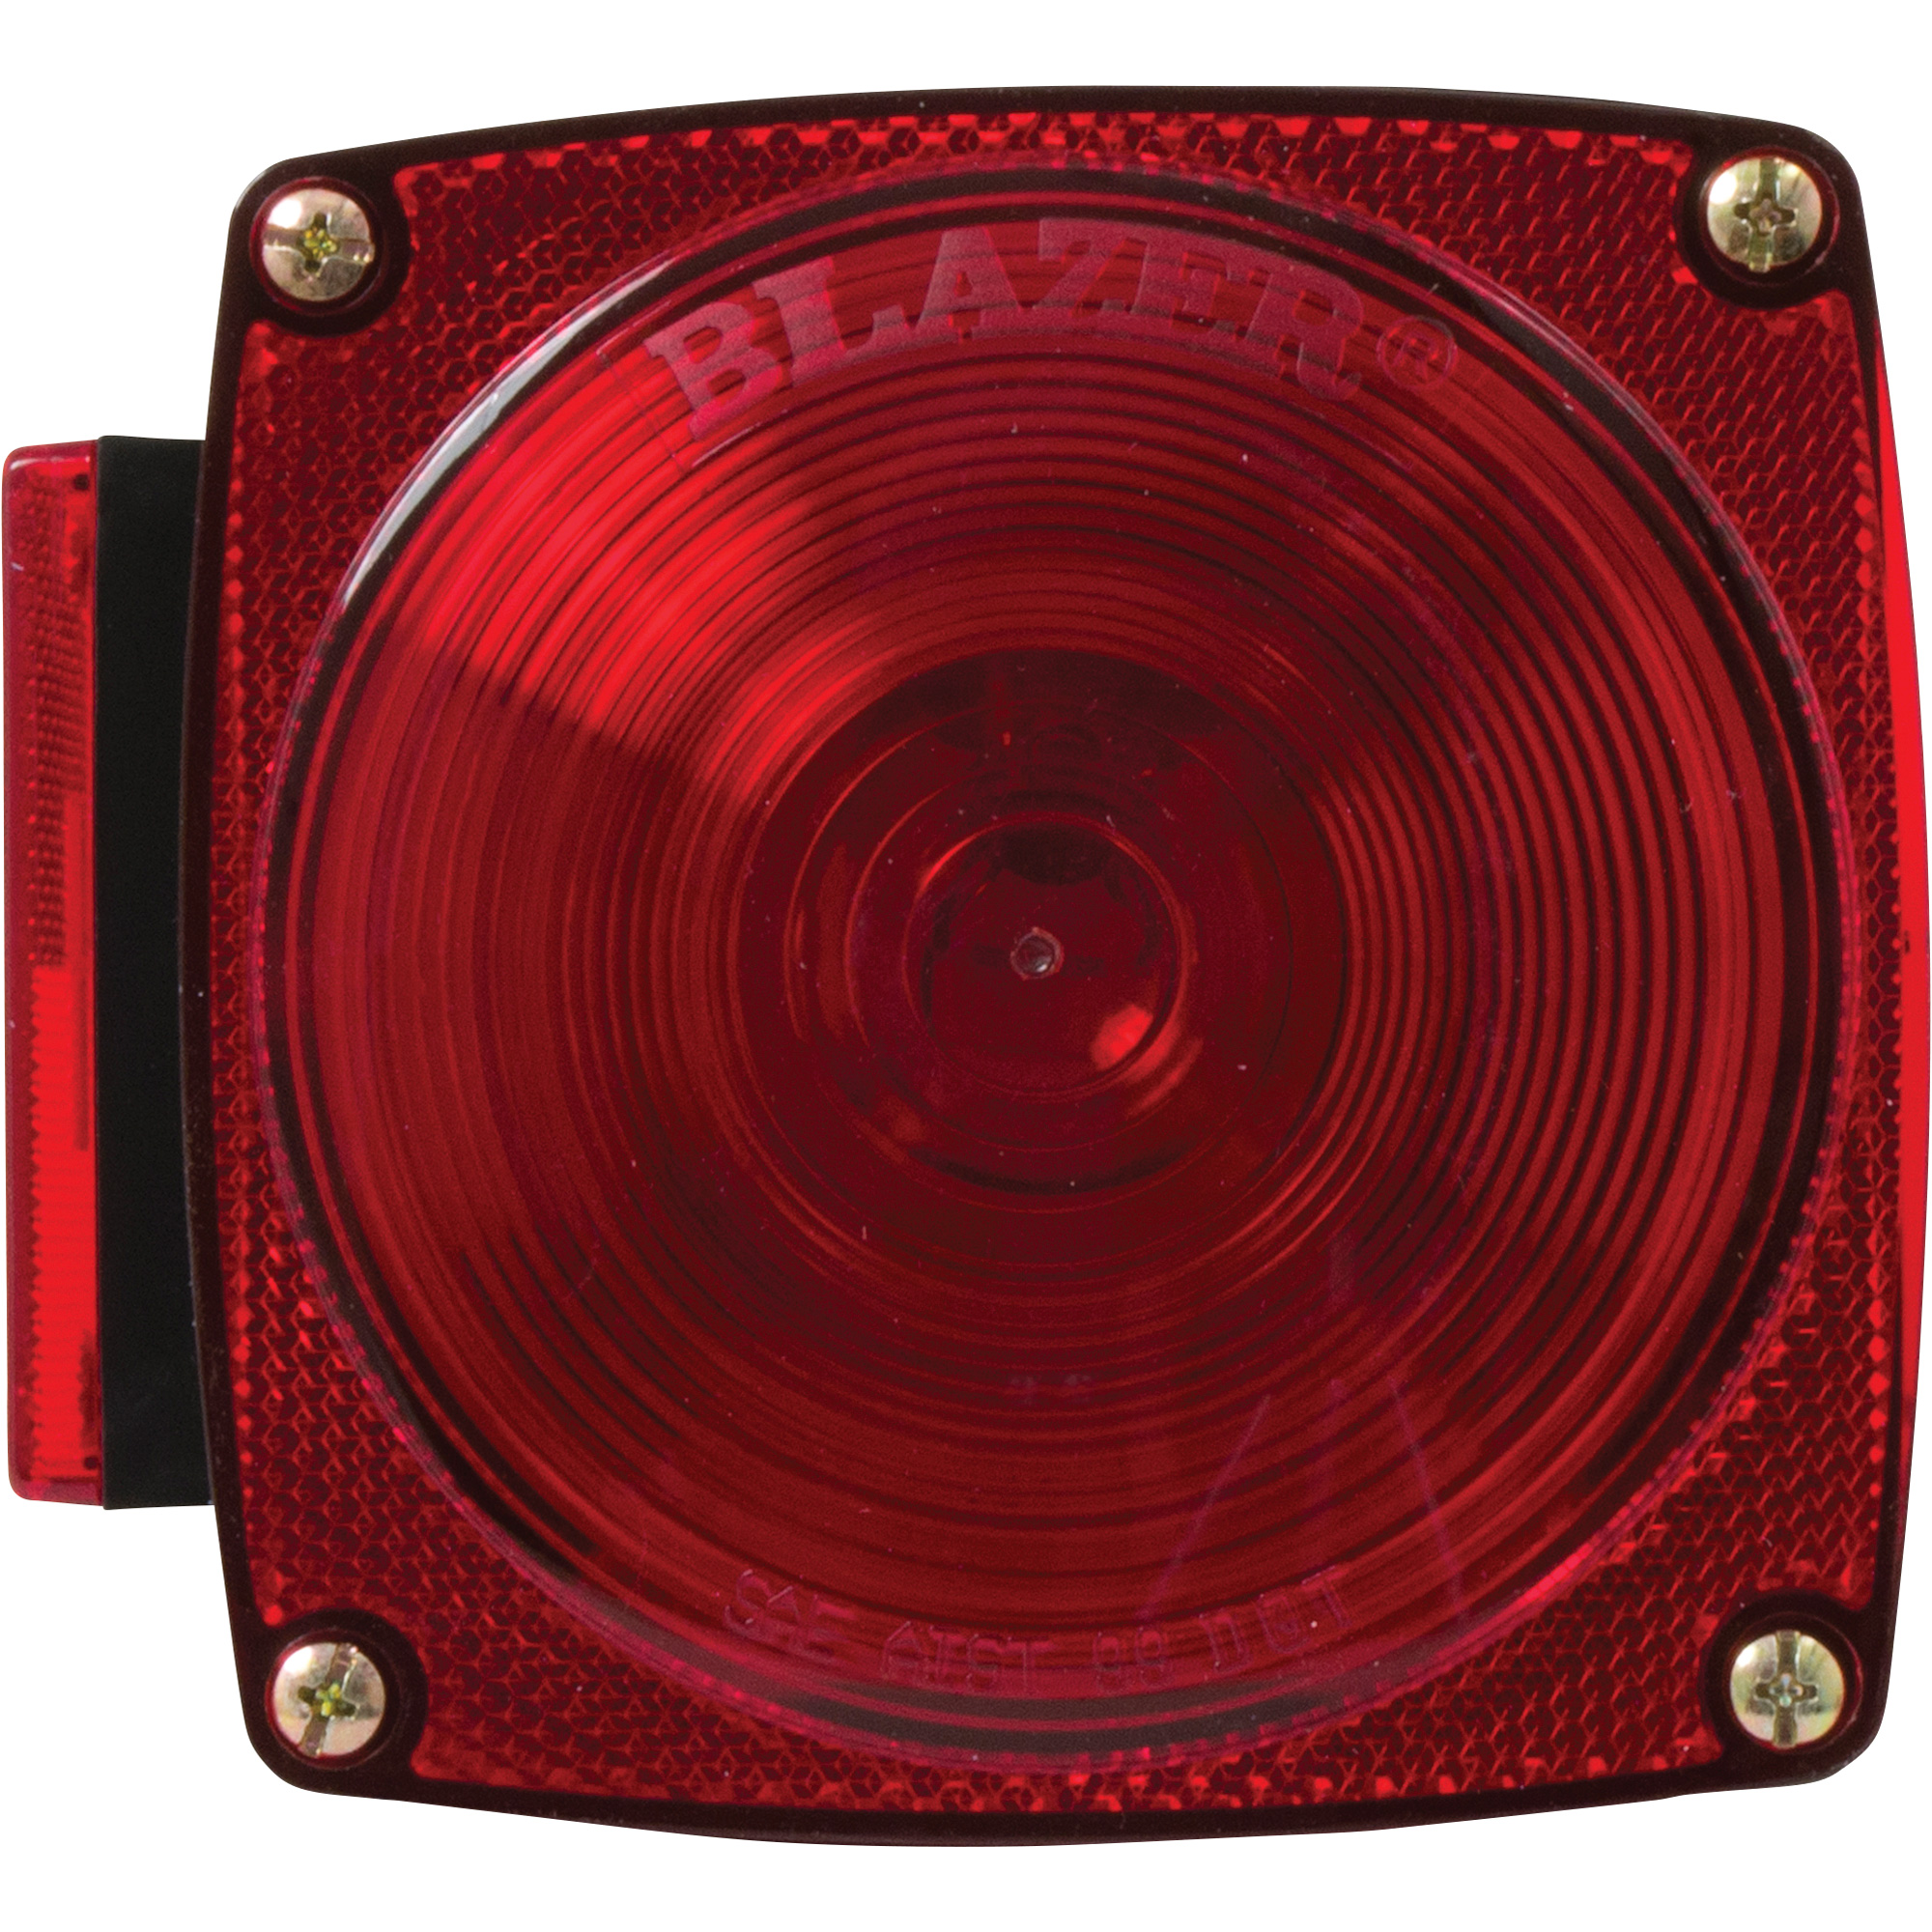 Hopkins Towing Solutions LED 7 Function Square Stop/Tail/Turn Light â For Vehicles Under 80Inch Wide, Red, Model C83PTM